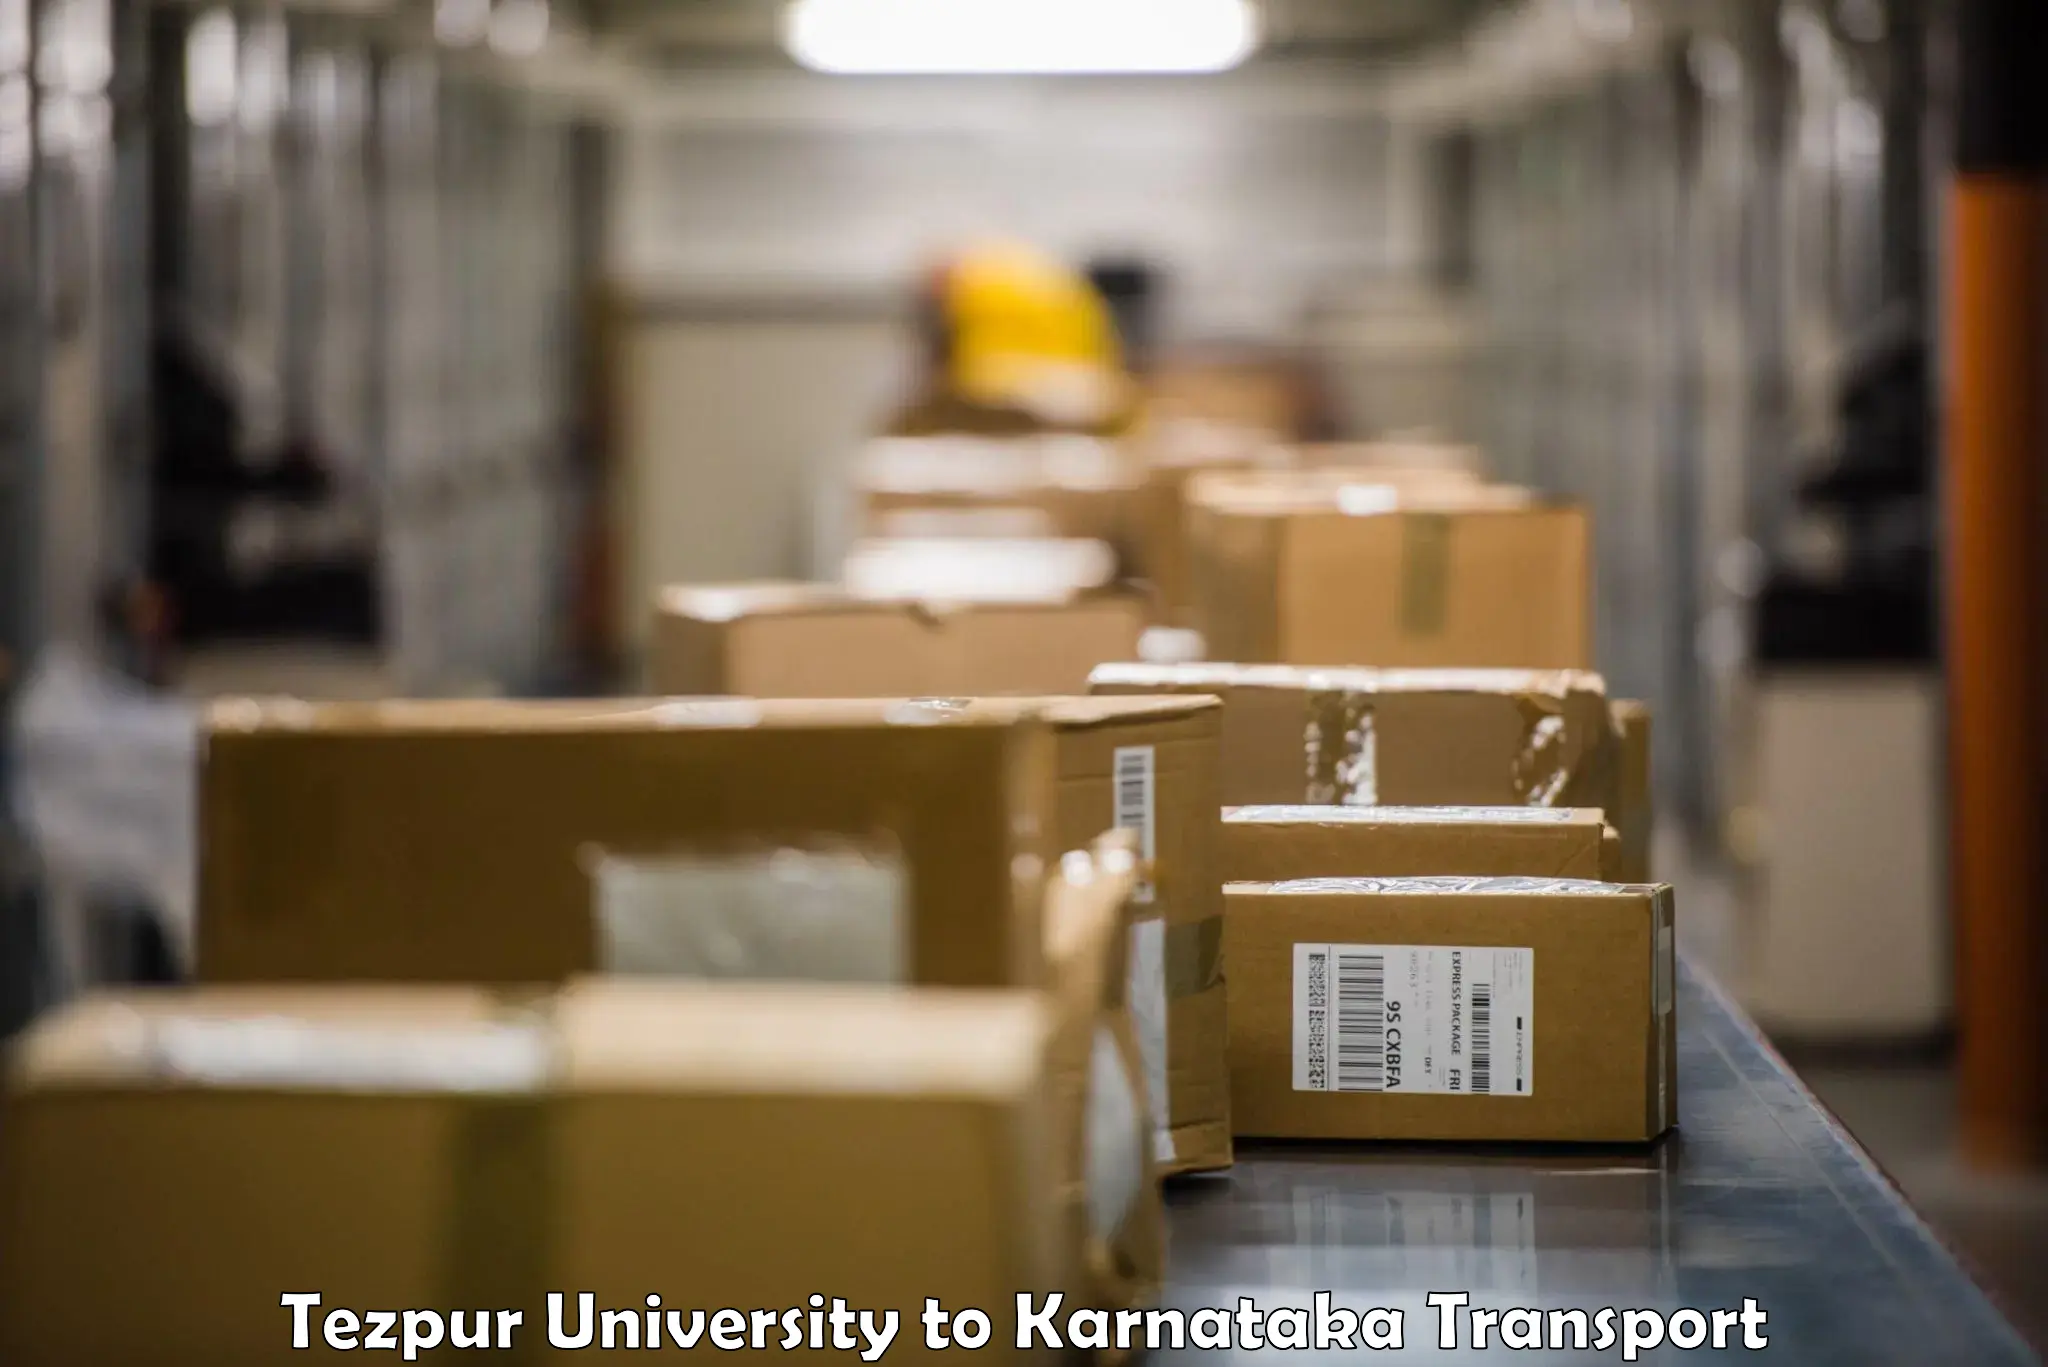 Goods delivery service Tezpur University to Bailhongal